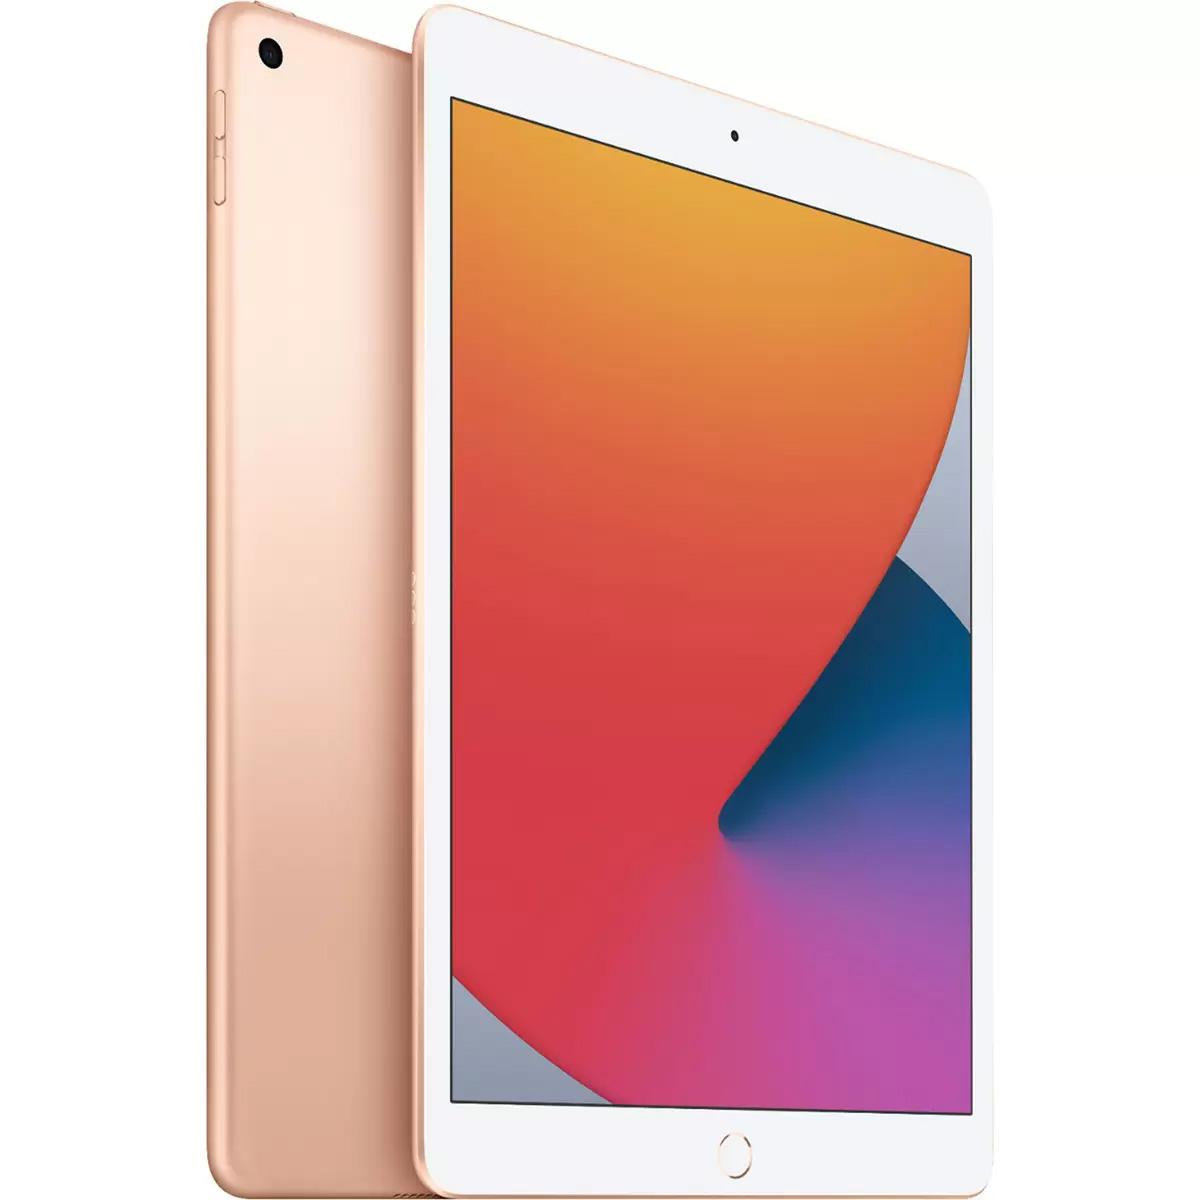 32GB Apple iPad 8th Gen 10.2 Wi-Fi Tablet for $279.99 Shipped